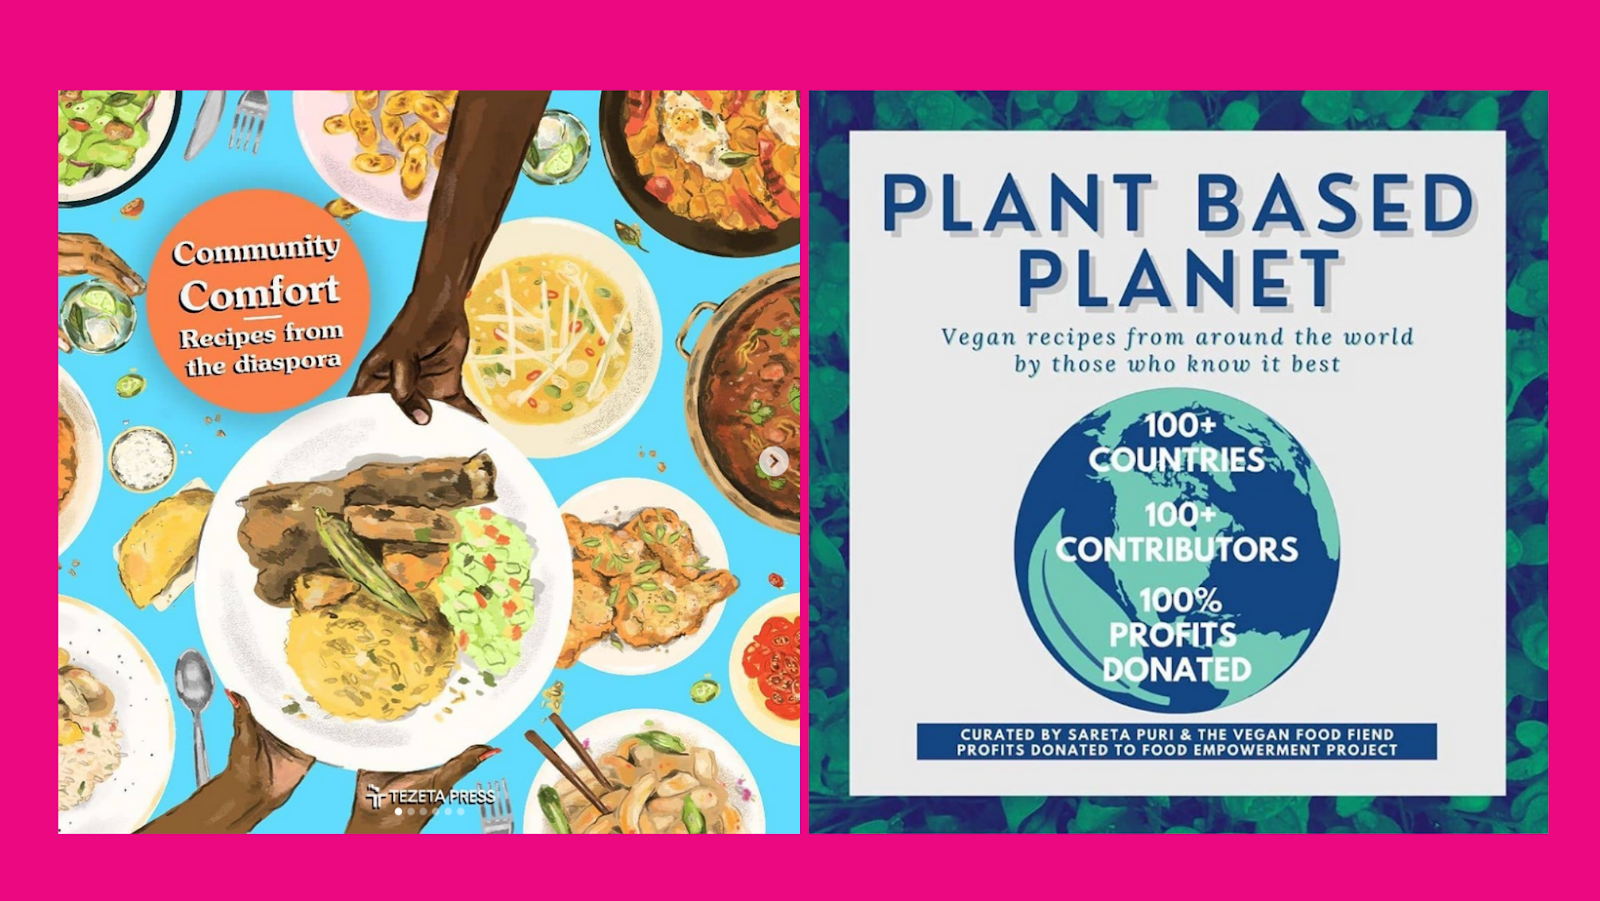 Community Comfort by Riaz Phillips and Plant Based Planet Book